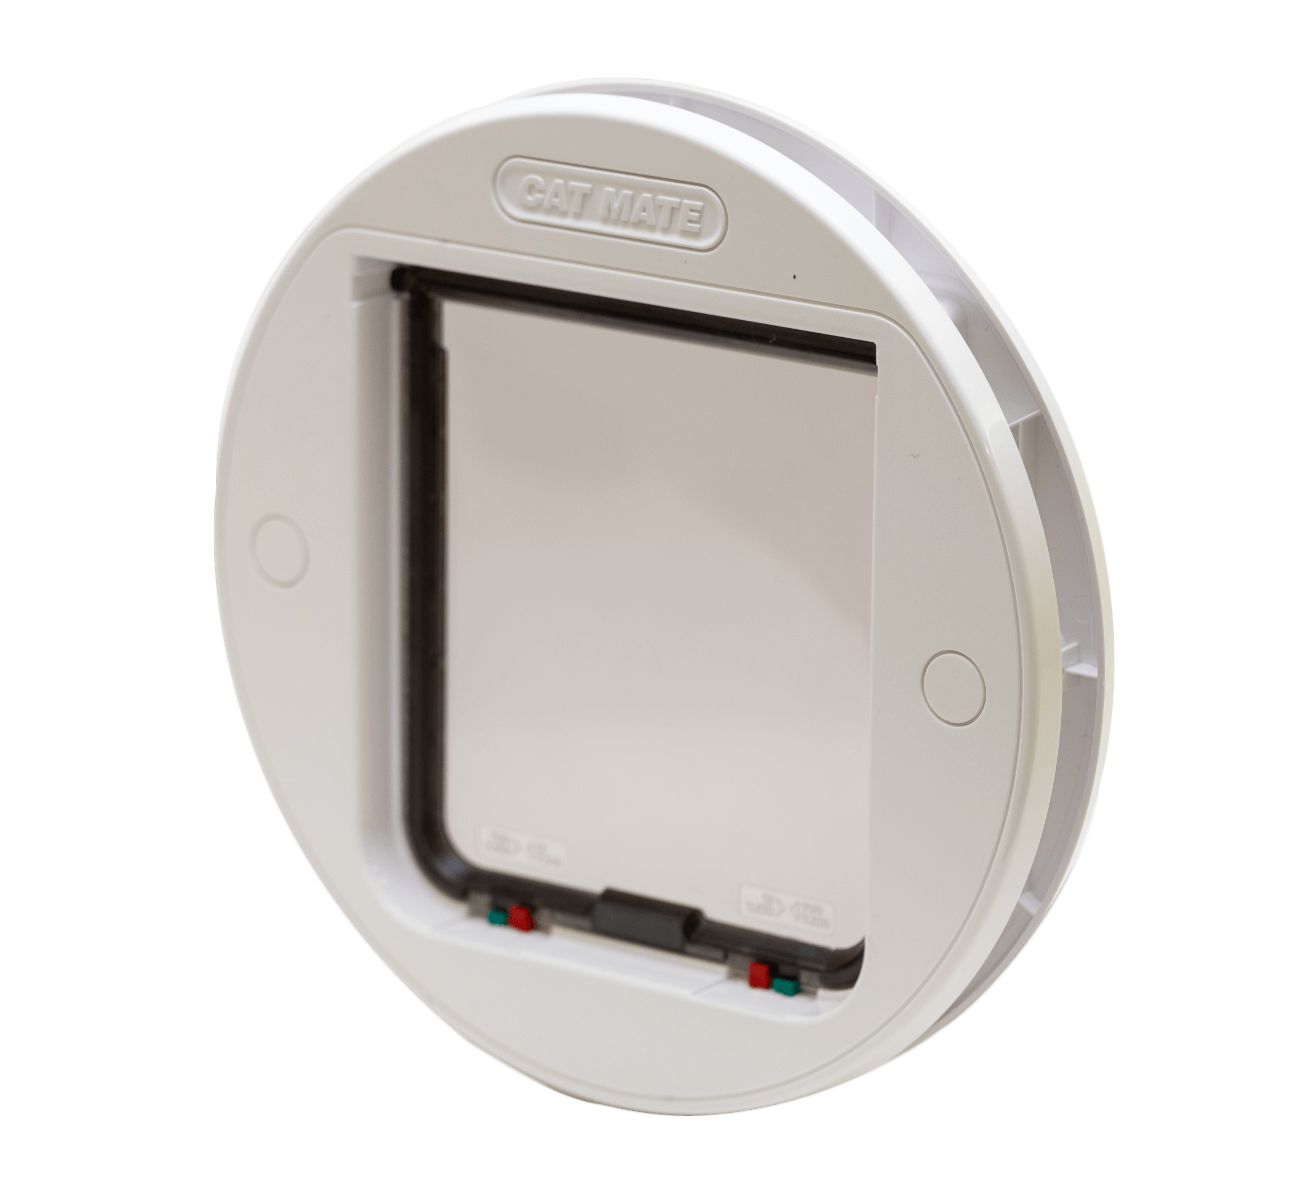 Cat Mate Large Glass & Wall Fitting Cat Flap – White (357W)